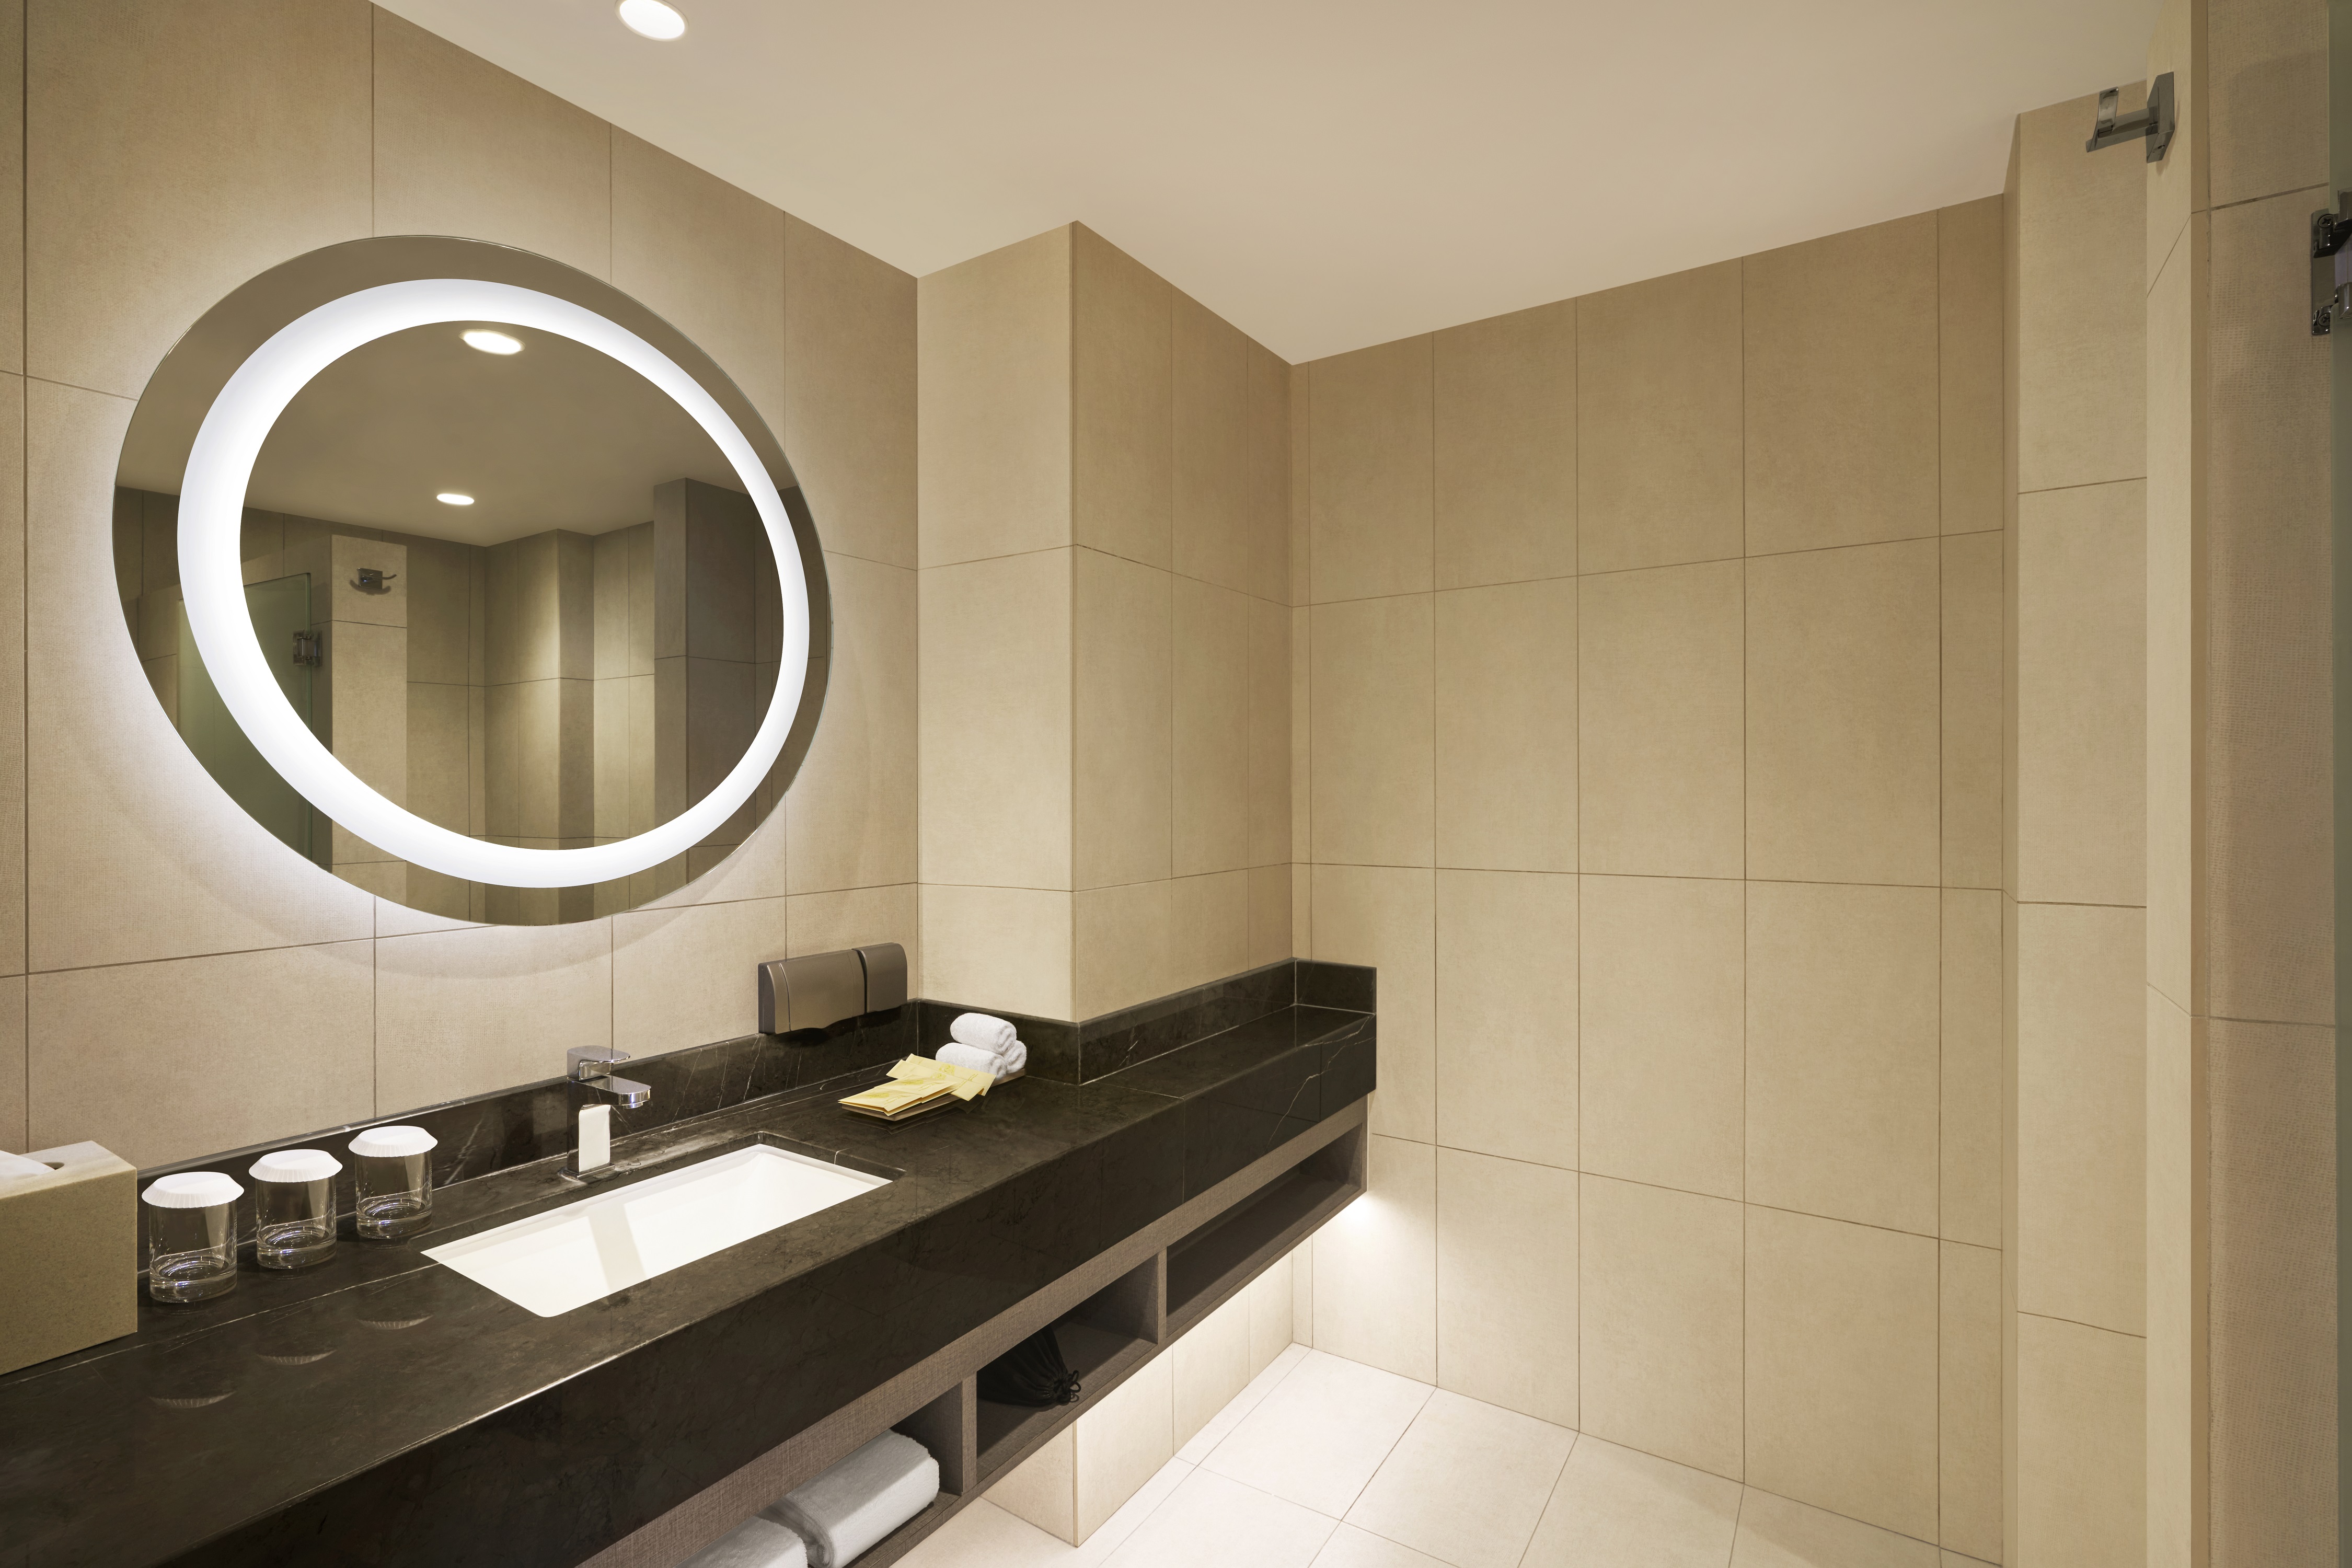 Bathroom Vanity Area with Amenities and a Round Lit Mirror